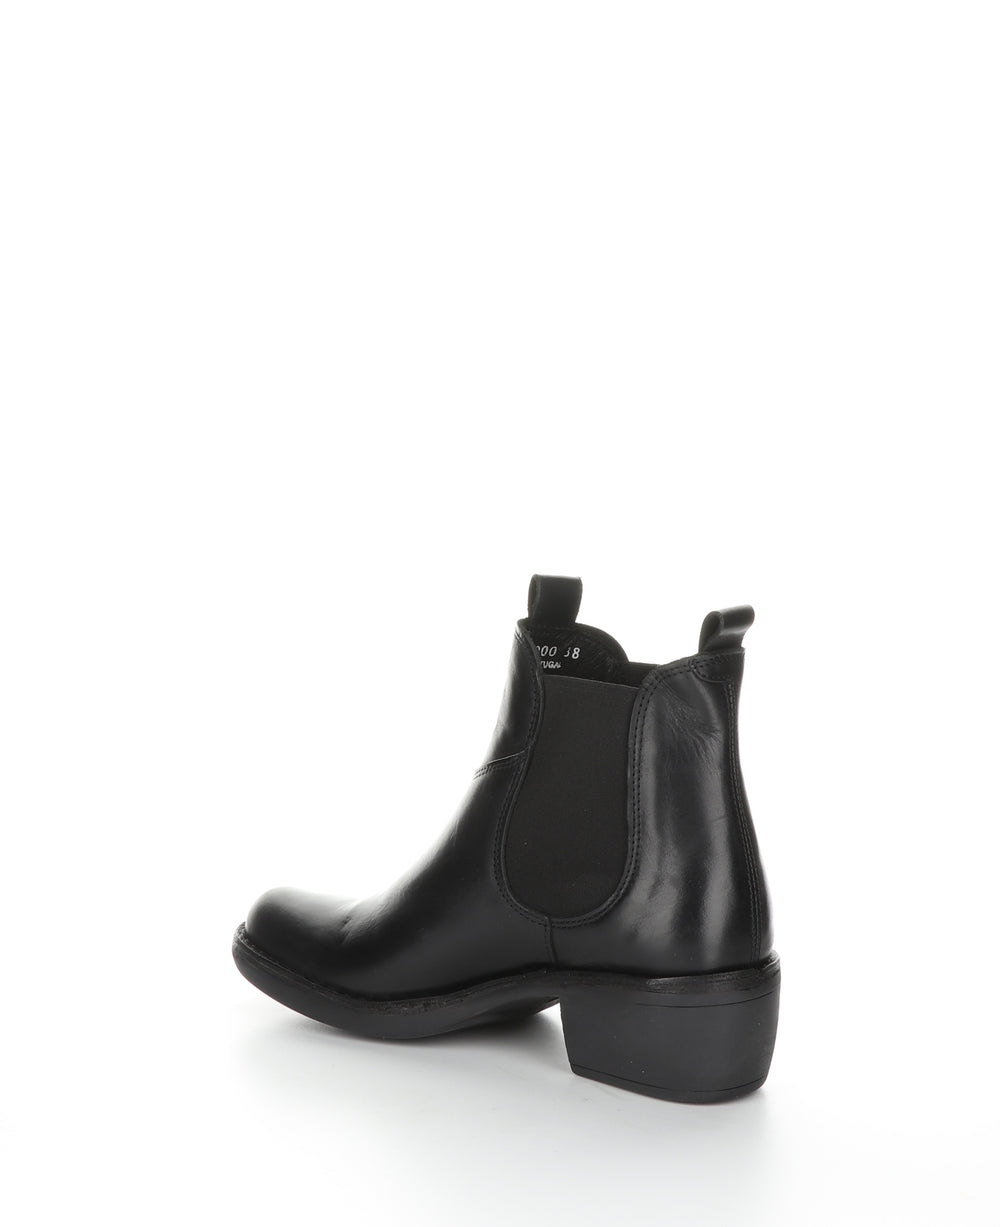 MEME030FLY Black Round Toe Ankle Boots